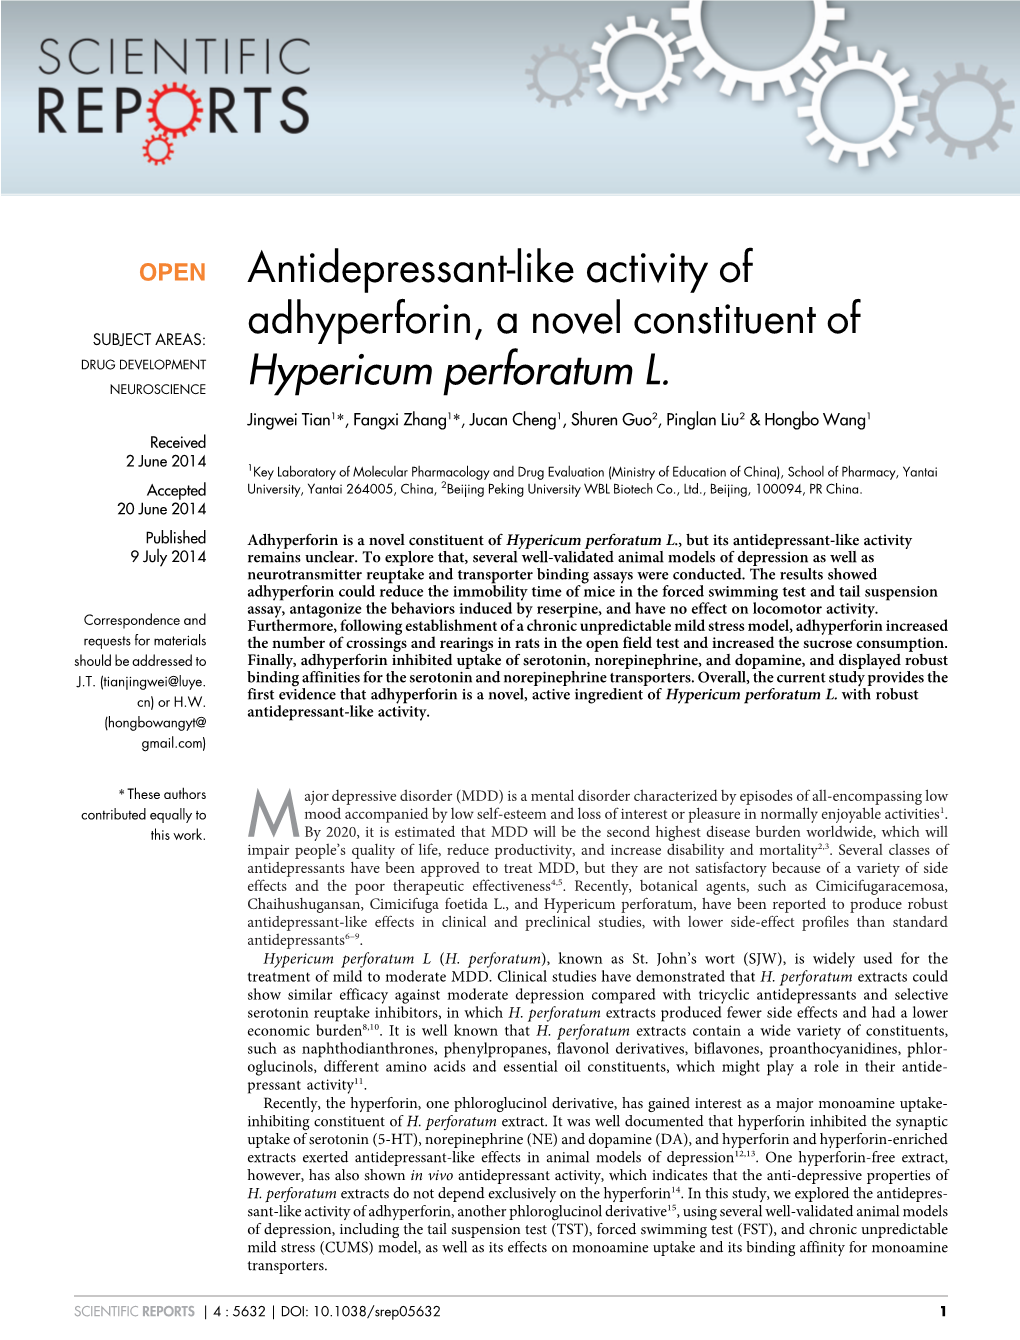 Antidepressant-Like Activity of Adhyperforin, a Novel Constituent Of